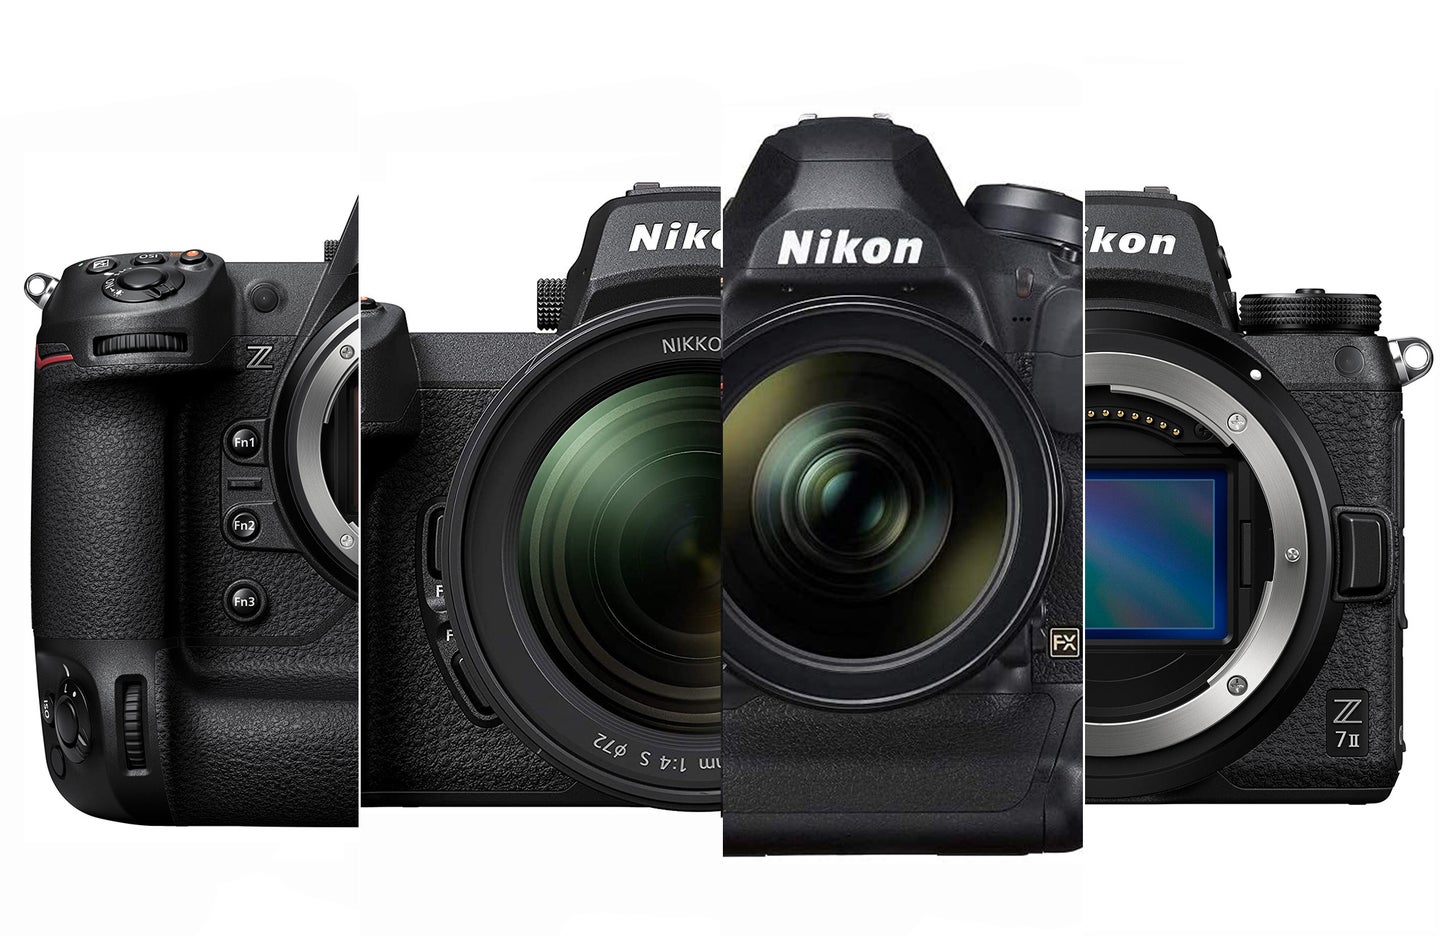 The best Nikon cameras composited